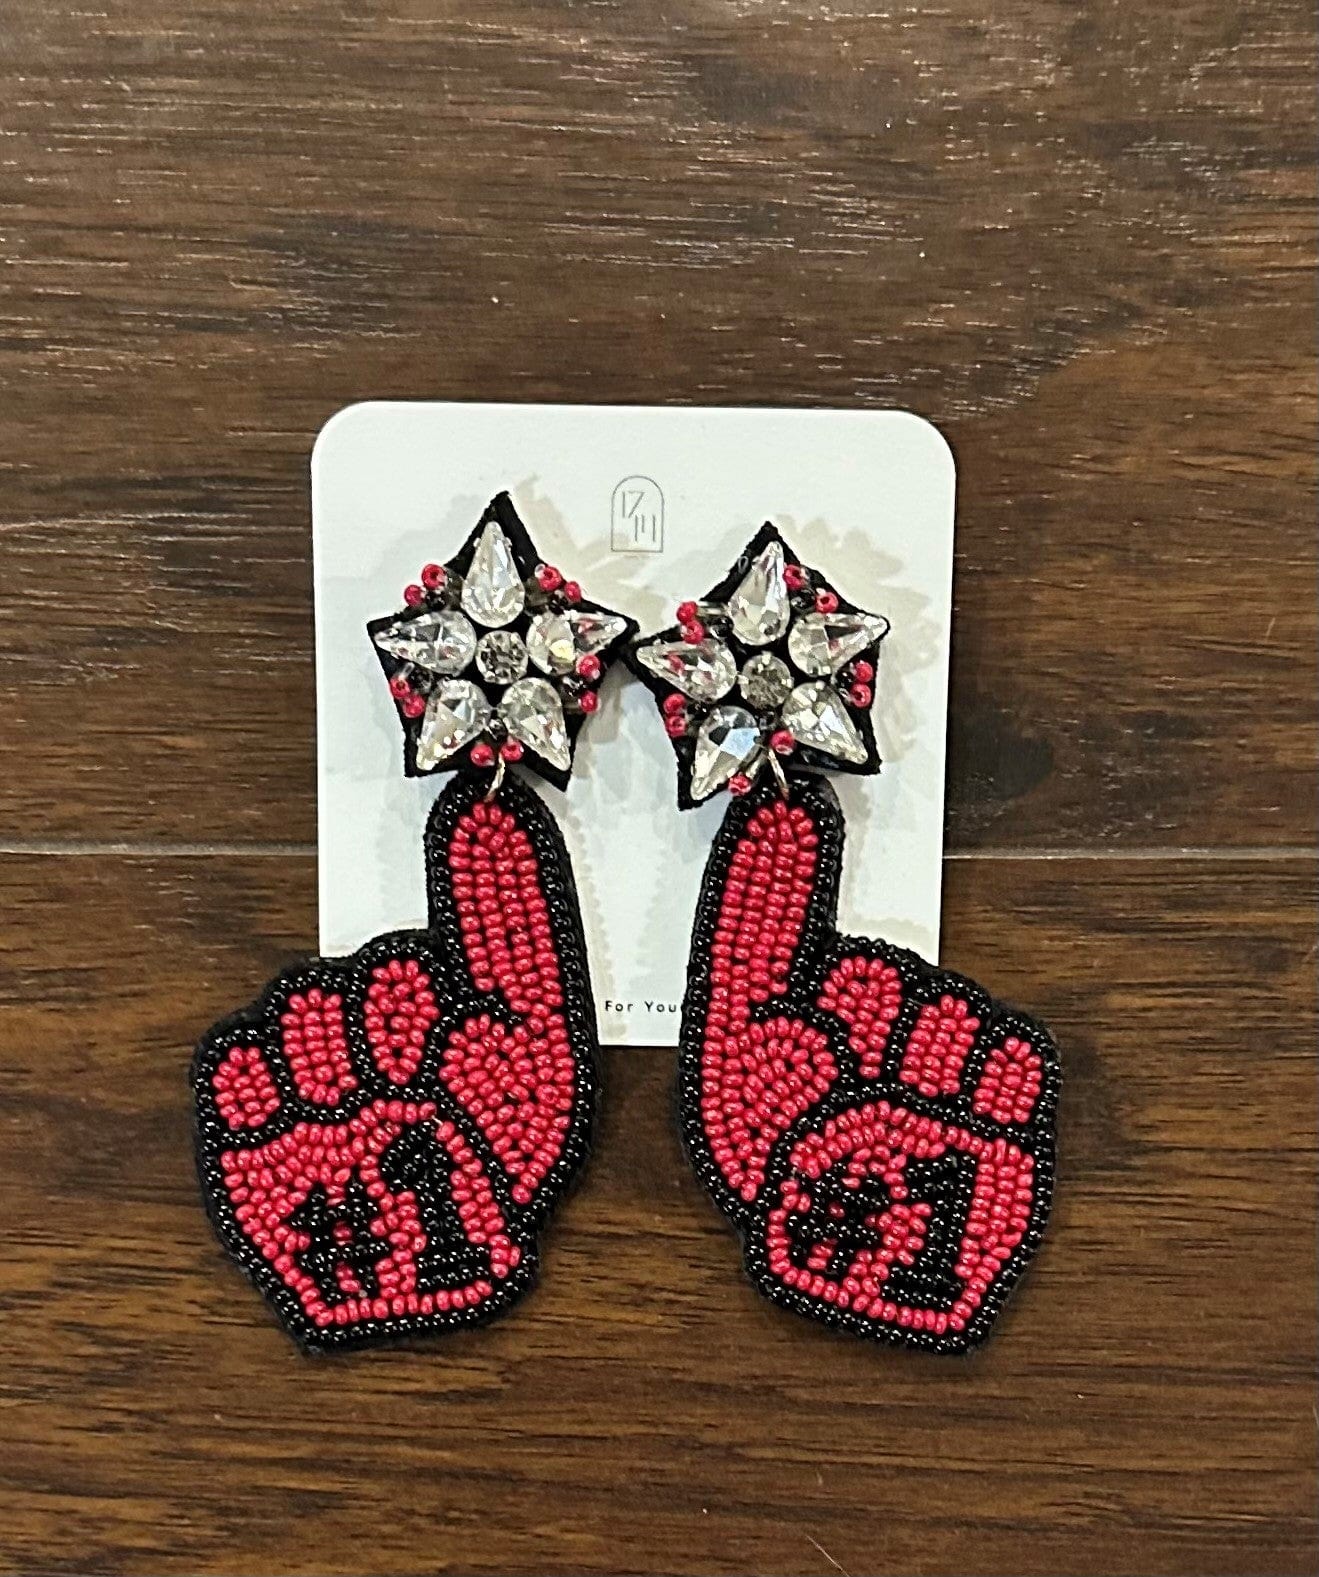 GAME DAY EARRINGS-#1 FAN-RED AND BLACK